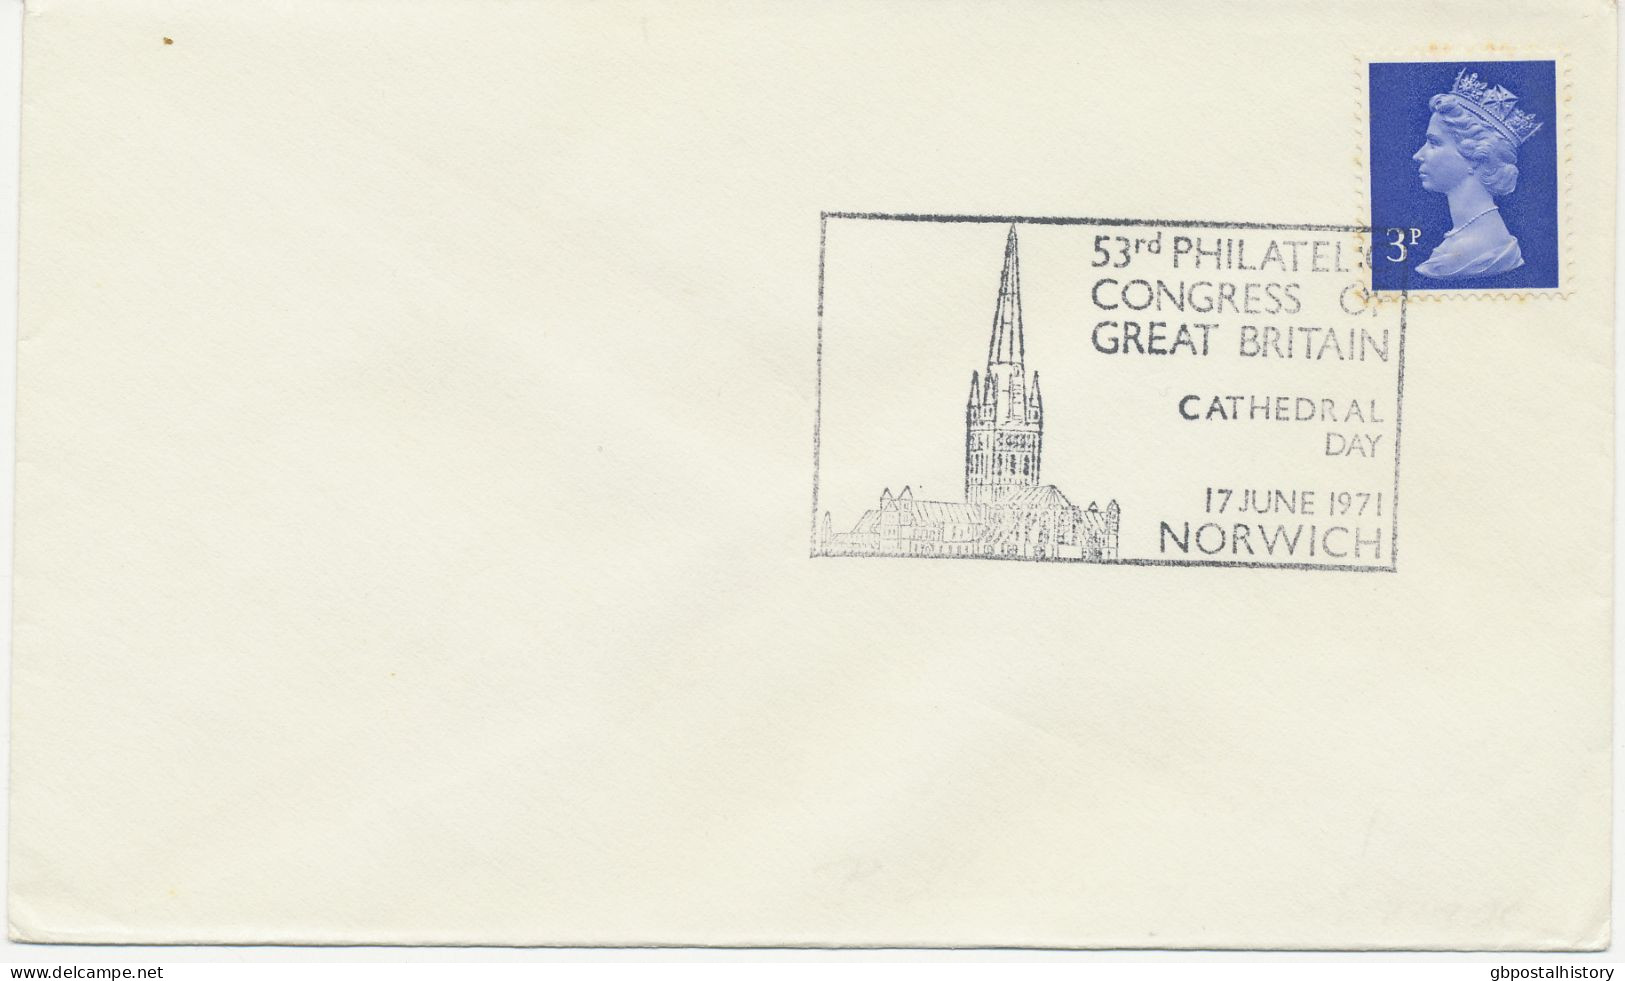 GB SPECIAL EVENT POSTMARKS 1971 53RD PHILATELIC CONGRESS OF GREAT BRITAIN NORWICH - CATHEDRAL DAY - Brieven En Documenten